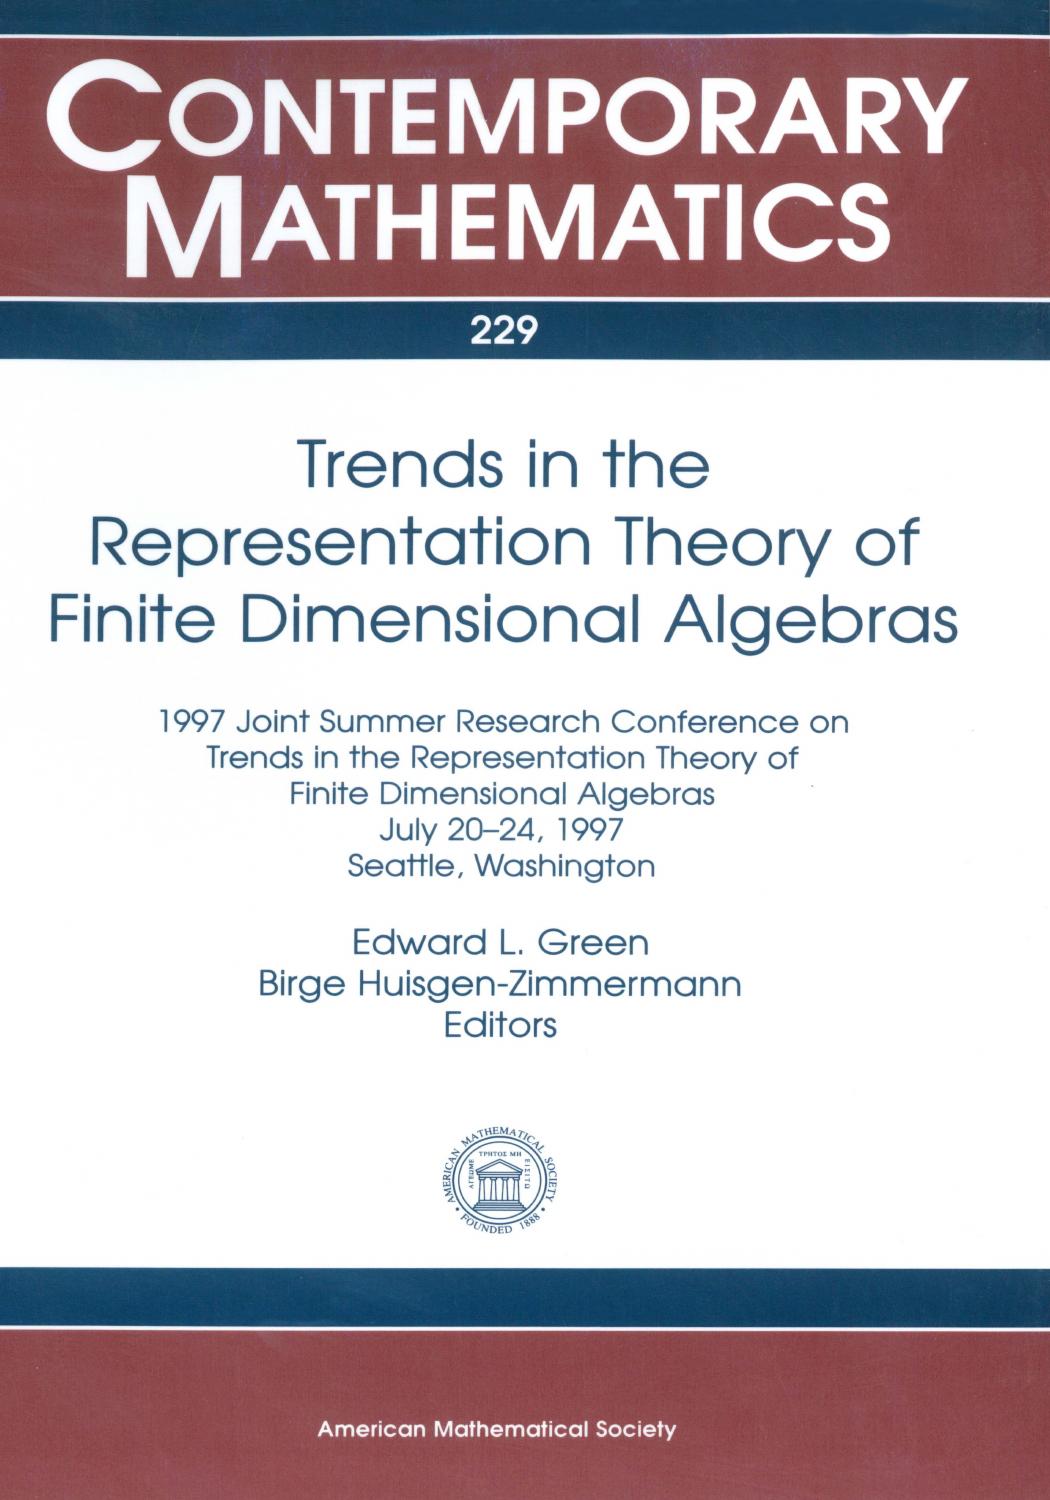 Trends in the Representation Theory of Finite Dimensional Algebras: 1997 Joint Summer Research Conference on Trends in the Representation Theory of Finite Dimensional Algebras